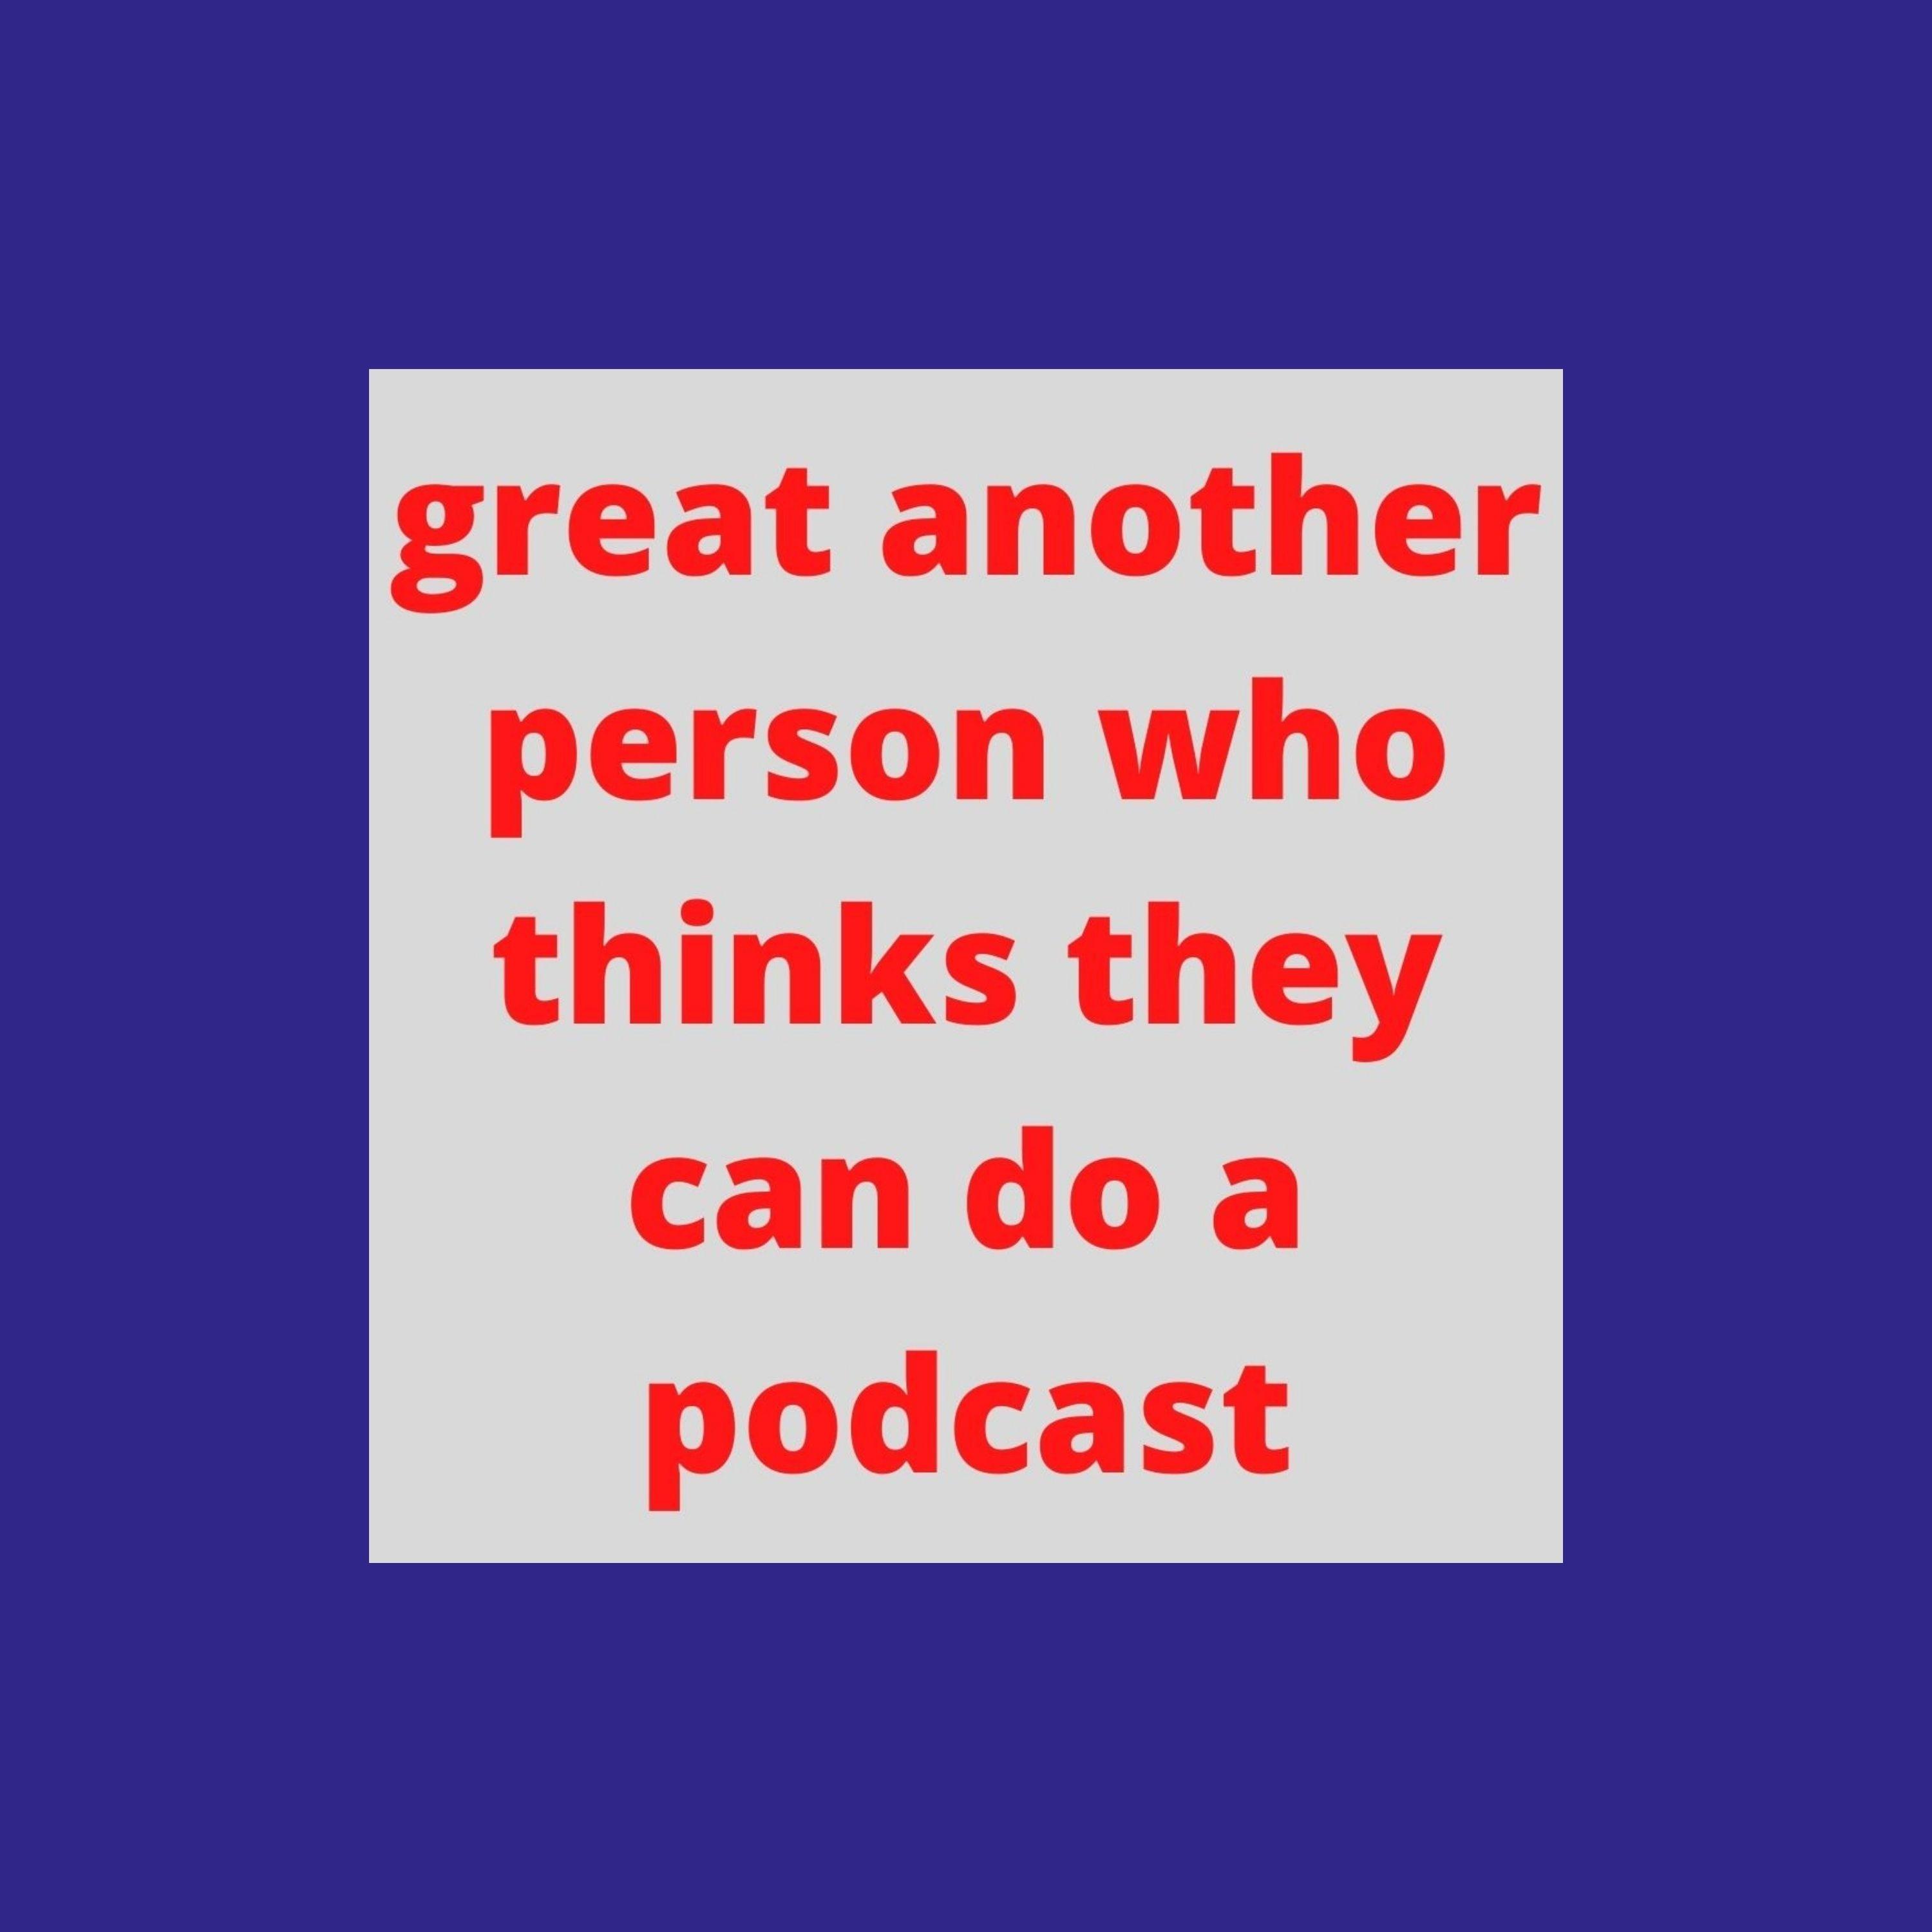 great another person who thinks they can do a podcast